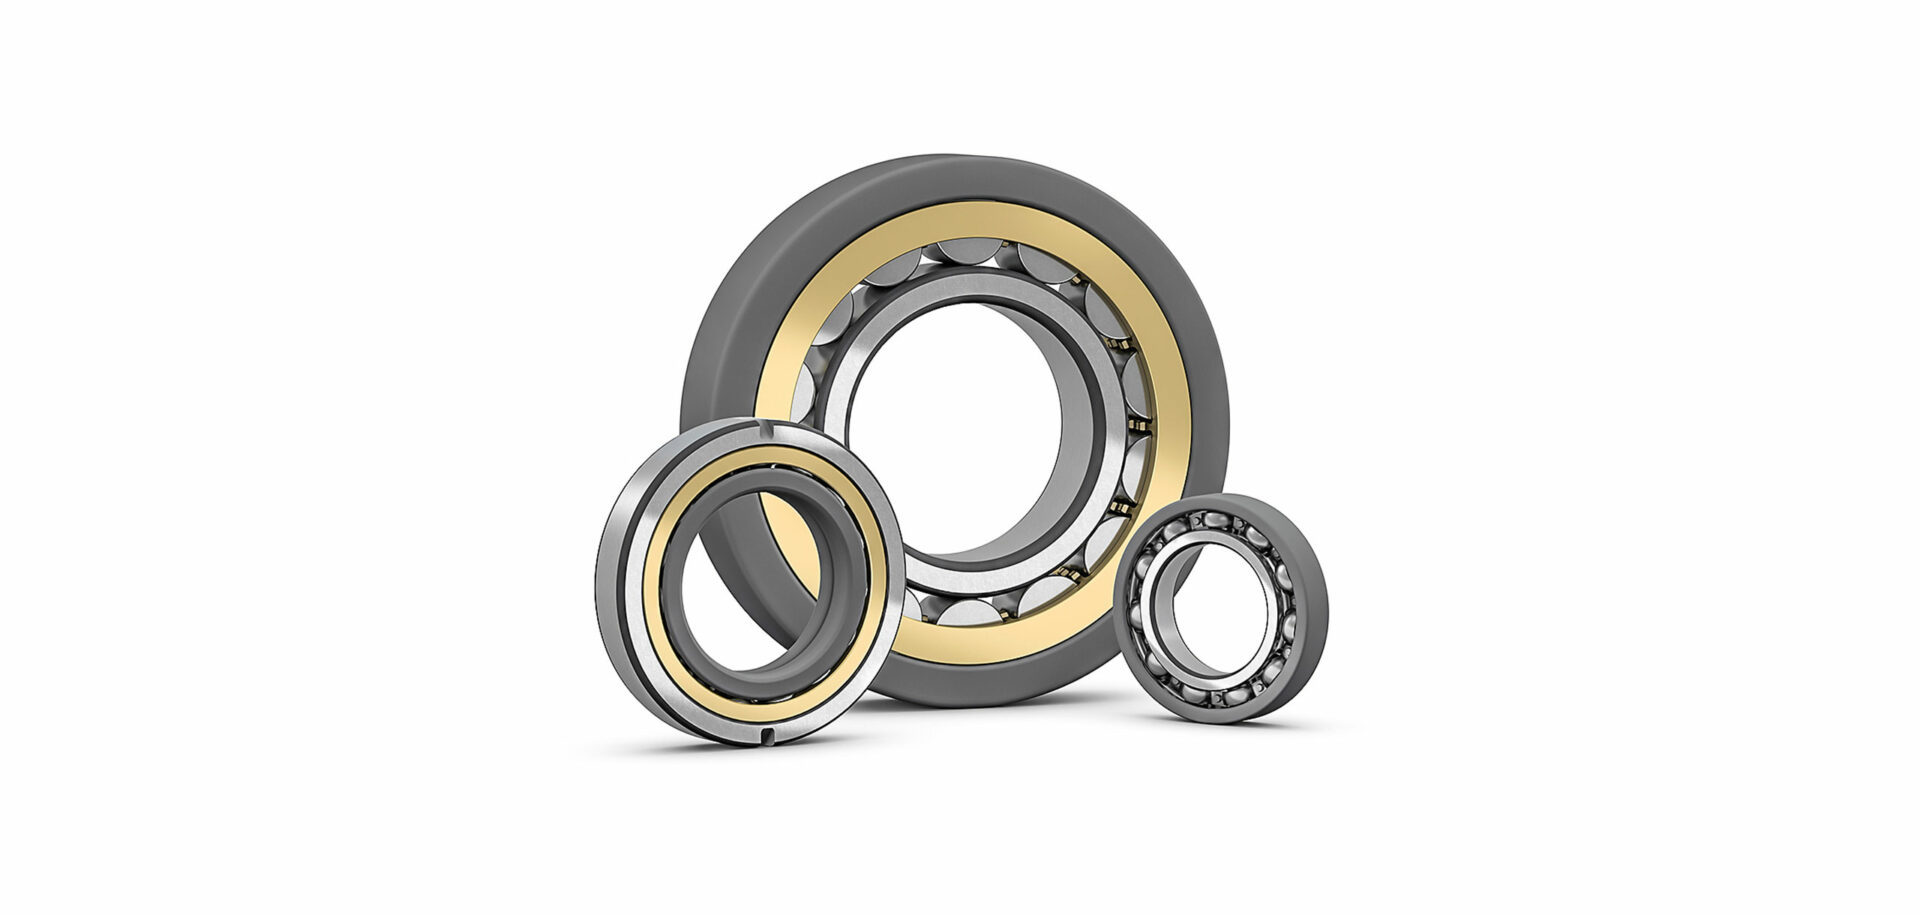 The Function Of Bearing